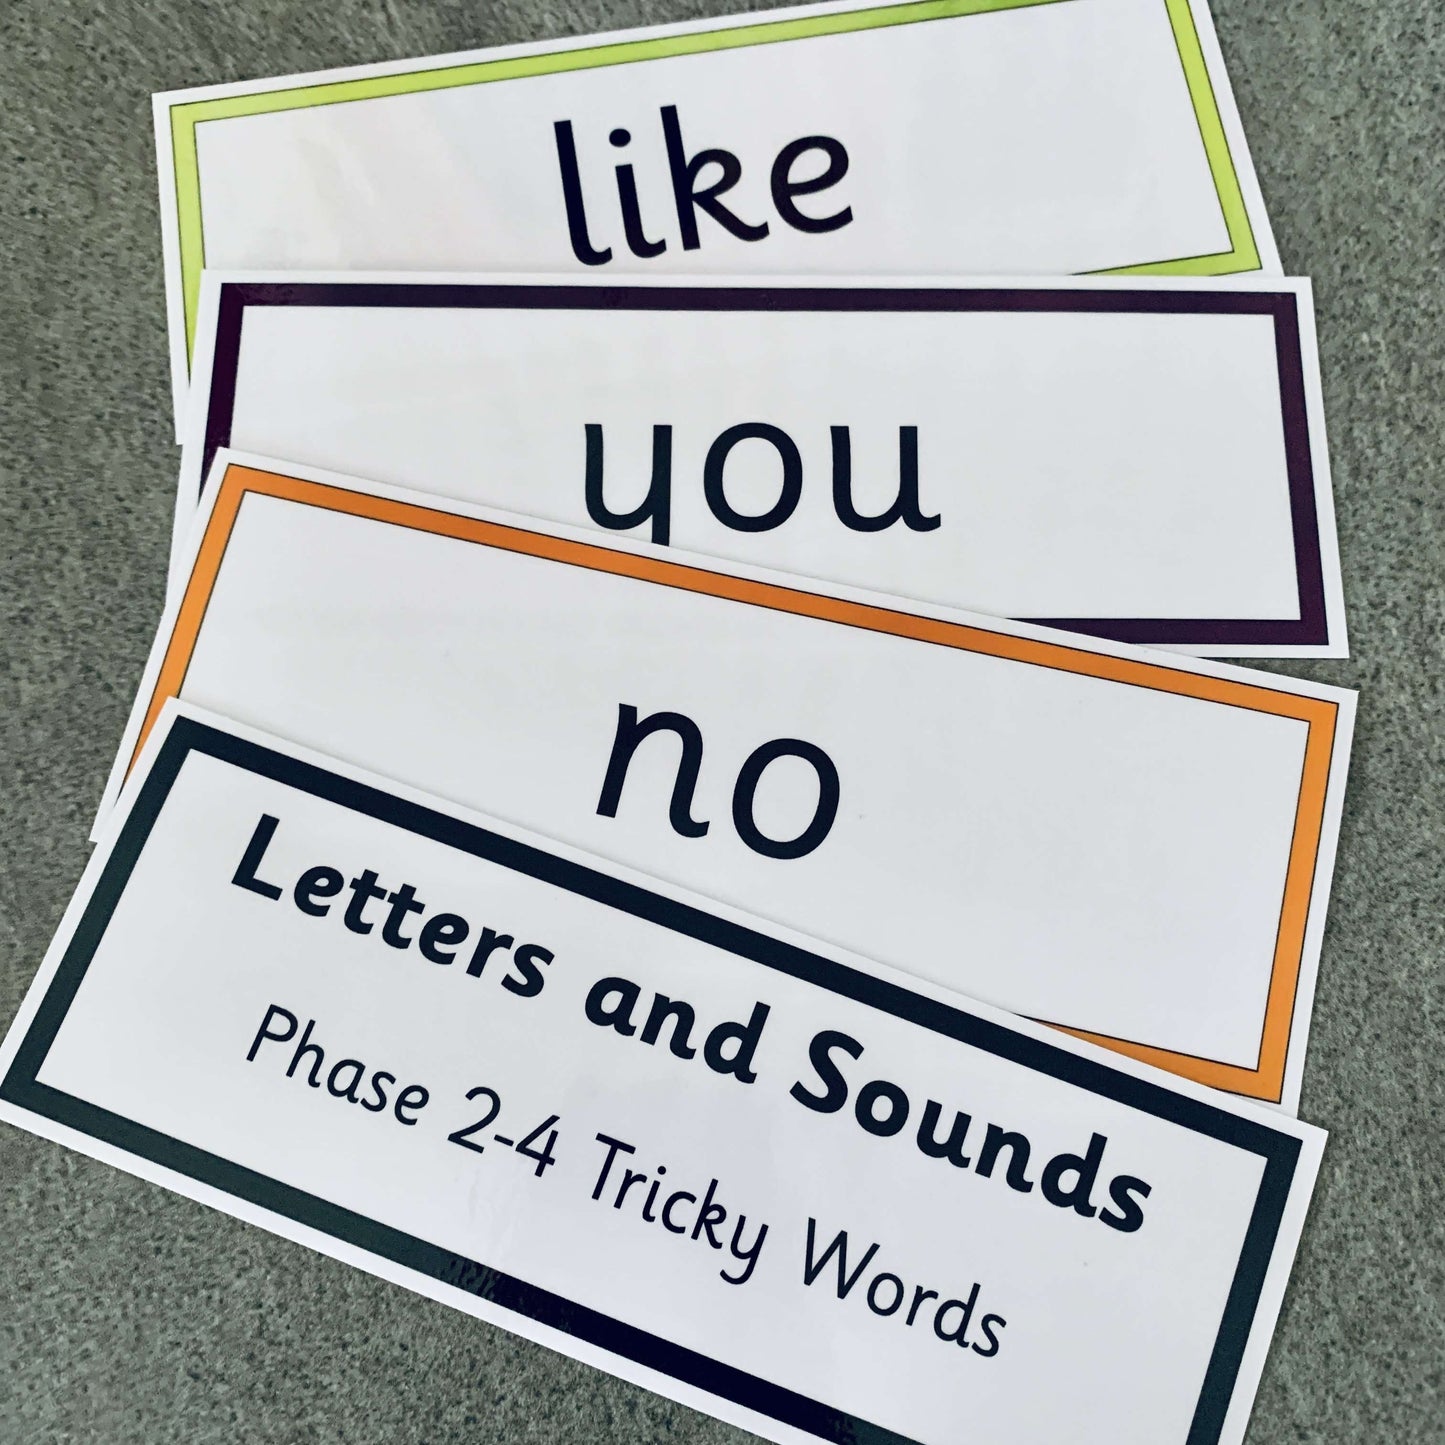 Letters and Sounds Tricky Words Phases 2 - 4 Flashcards:Primary Classroom Resources